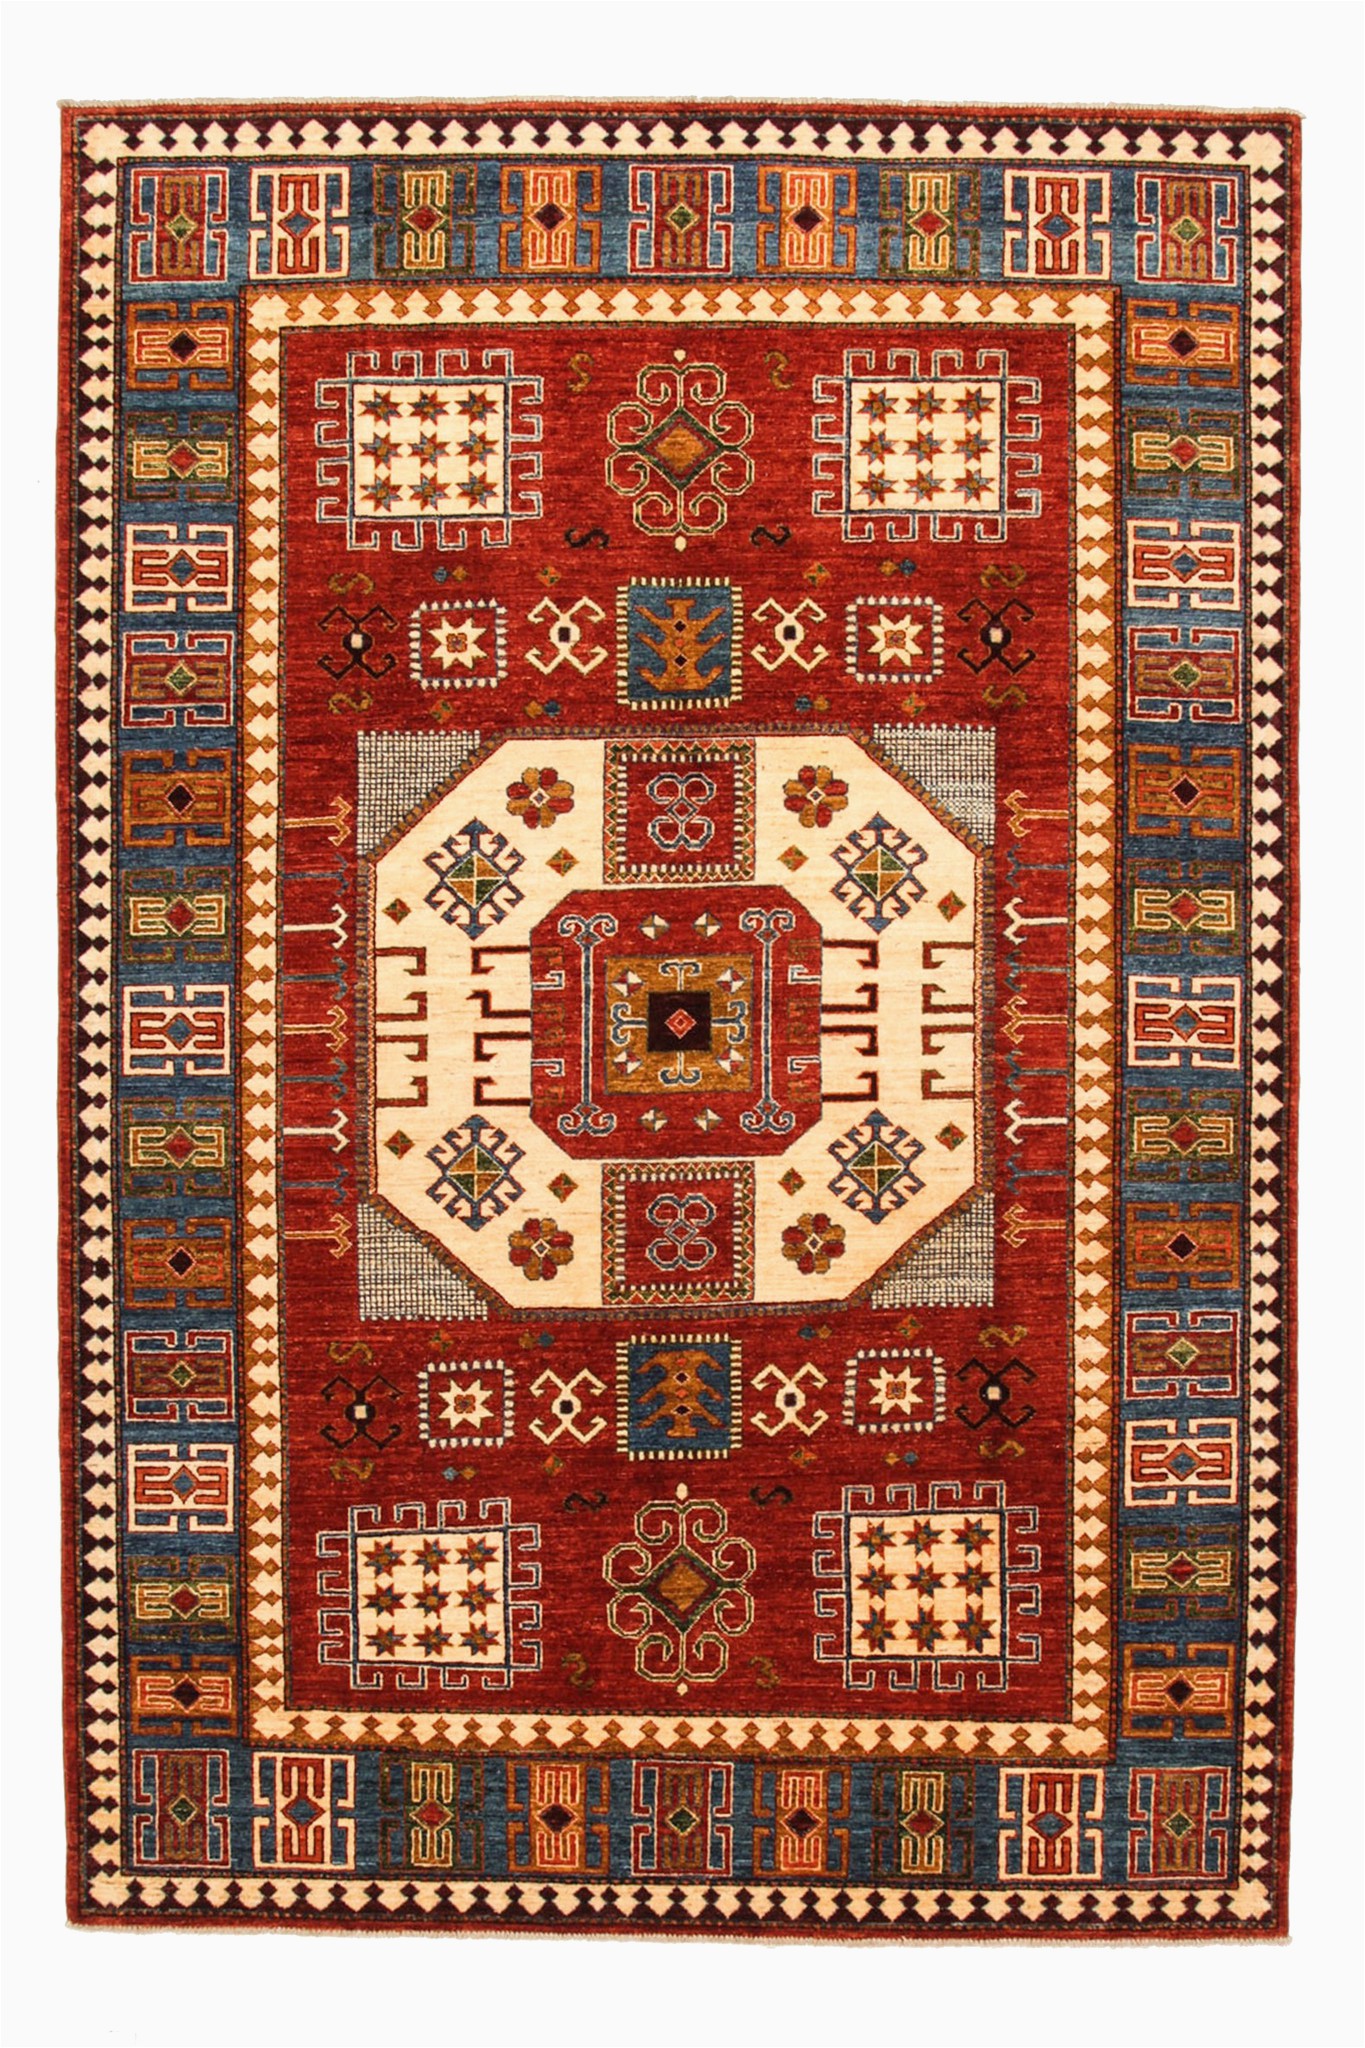 6 Foot by 9 Foot area Rugs Hand Knotted Super Fine Kazak Ghazny Wool 297×202 Cm area Rug Carpet